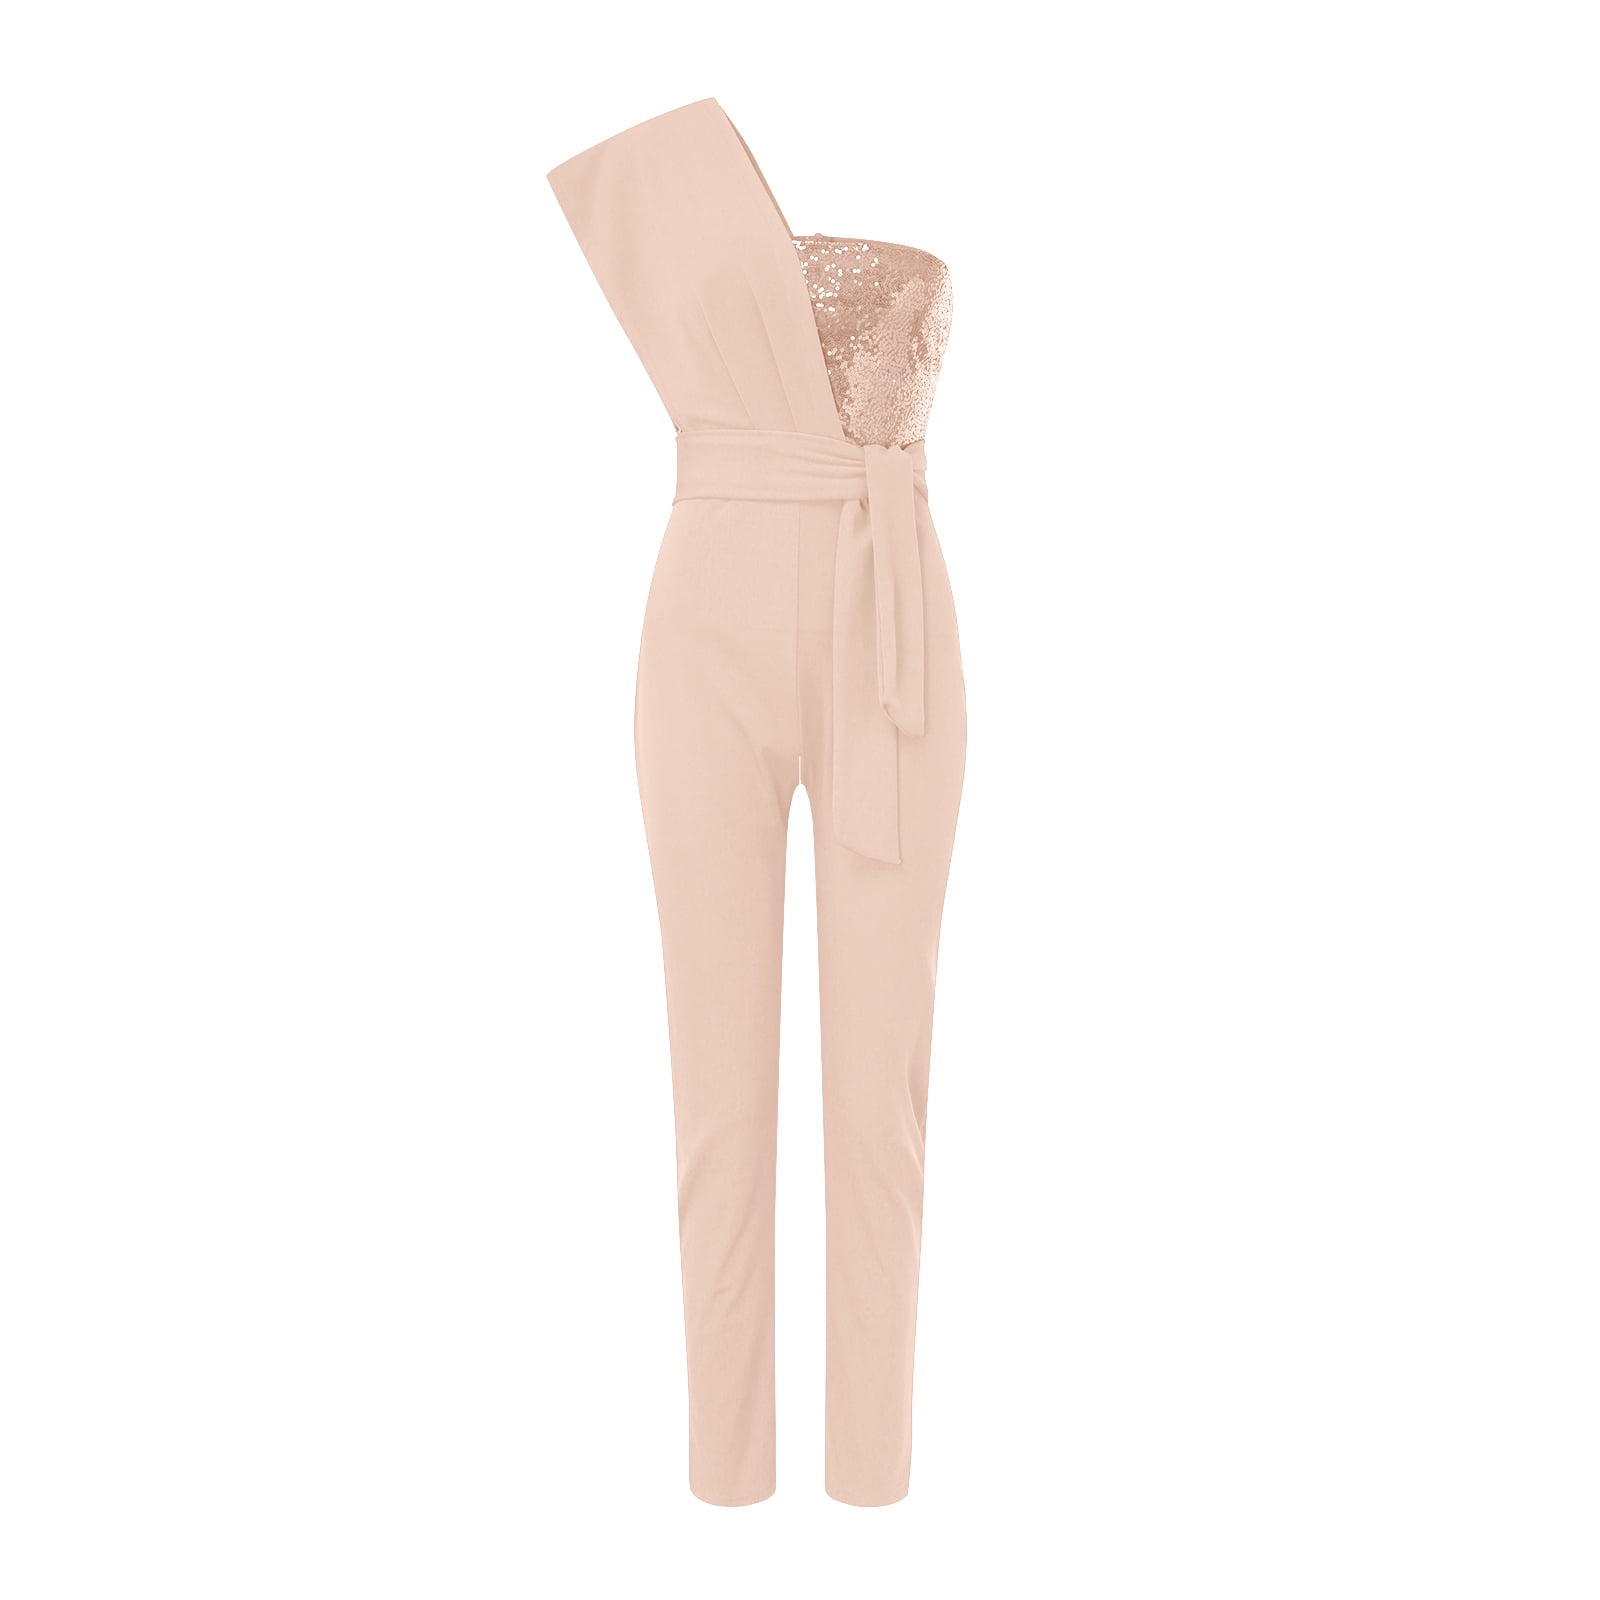 Aayomet Petite Jumpsuits for Women Womens Fashion Splicing Solid